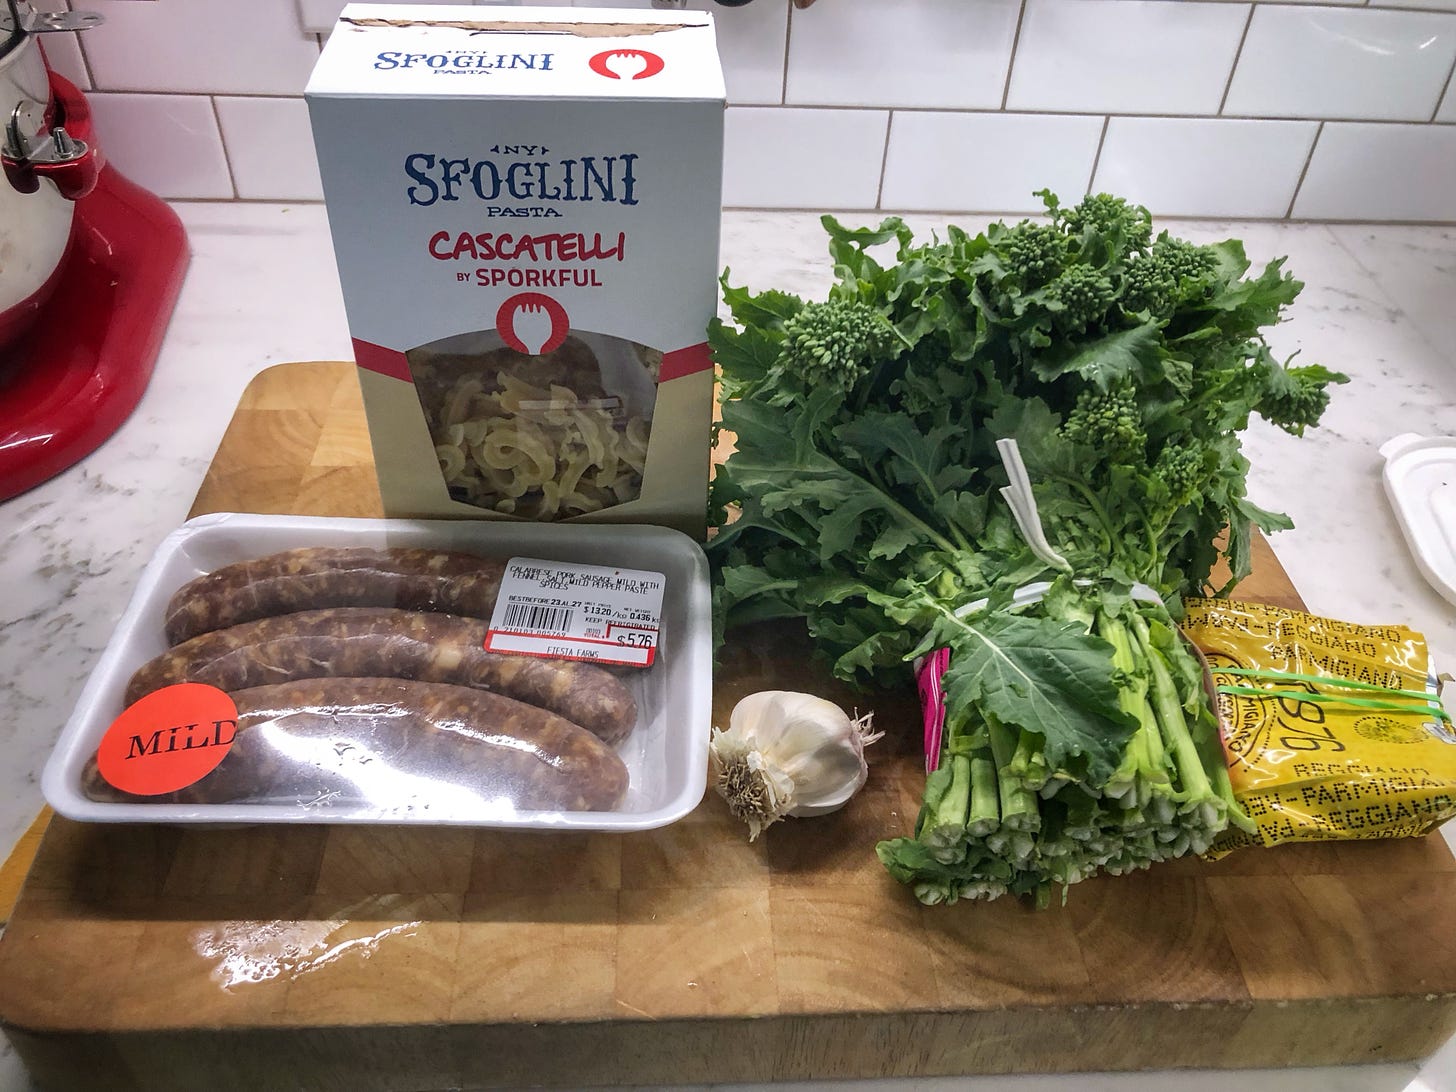 The ingredients for the recipe: cascatelli pasta, Italian sausage, rapini, garlic, and Parmesan cheese, arranged on a counter